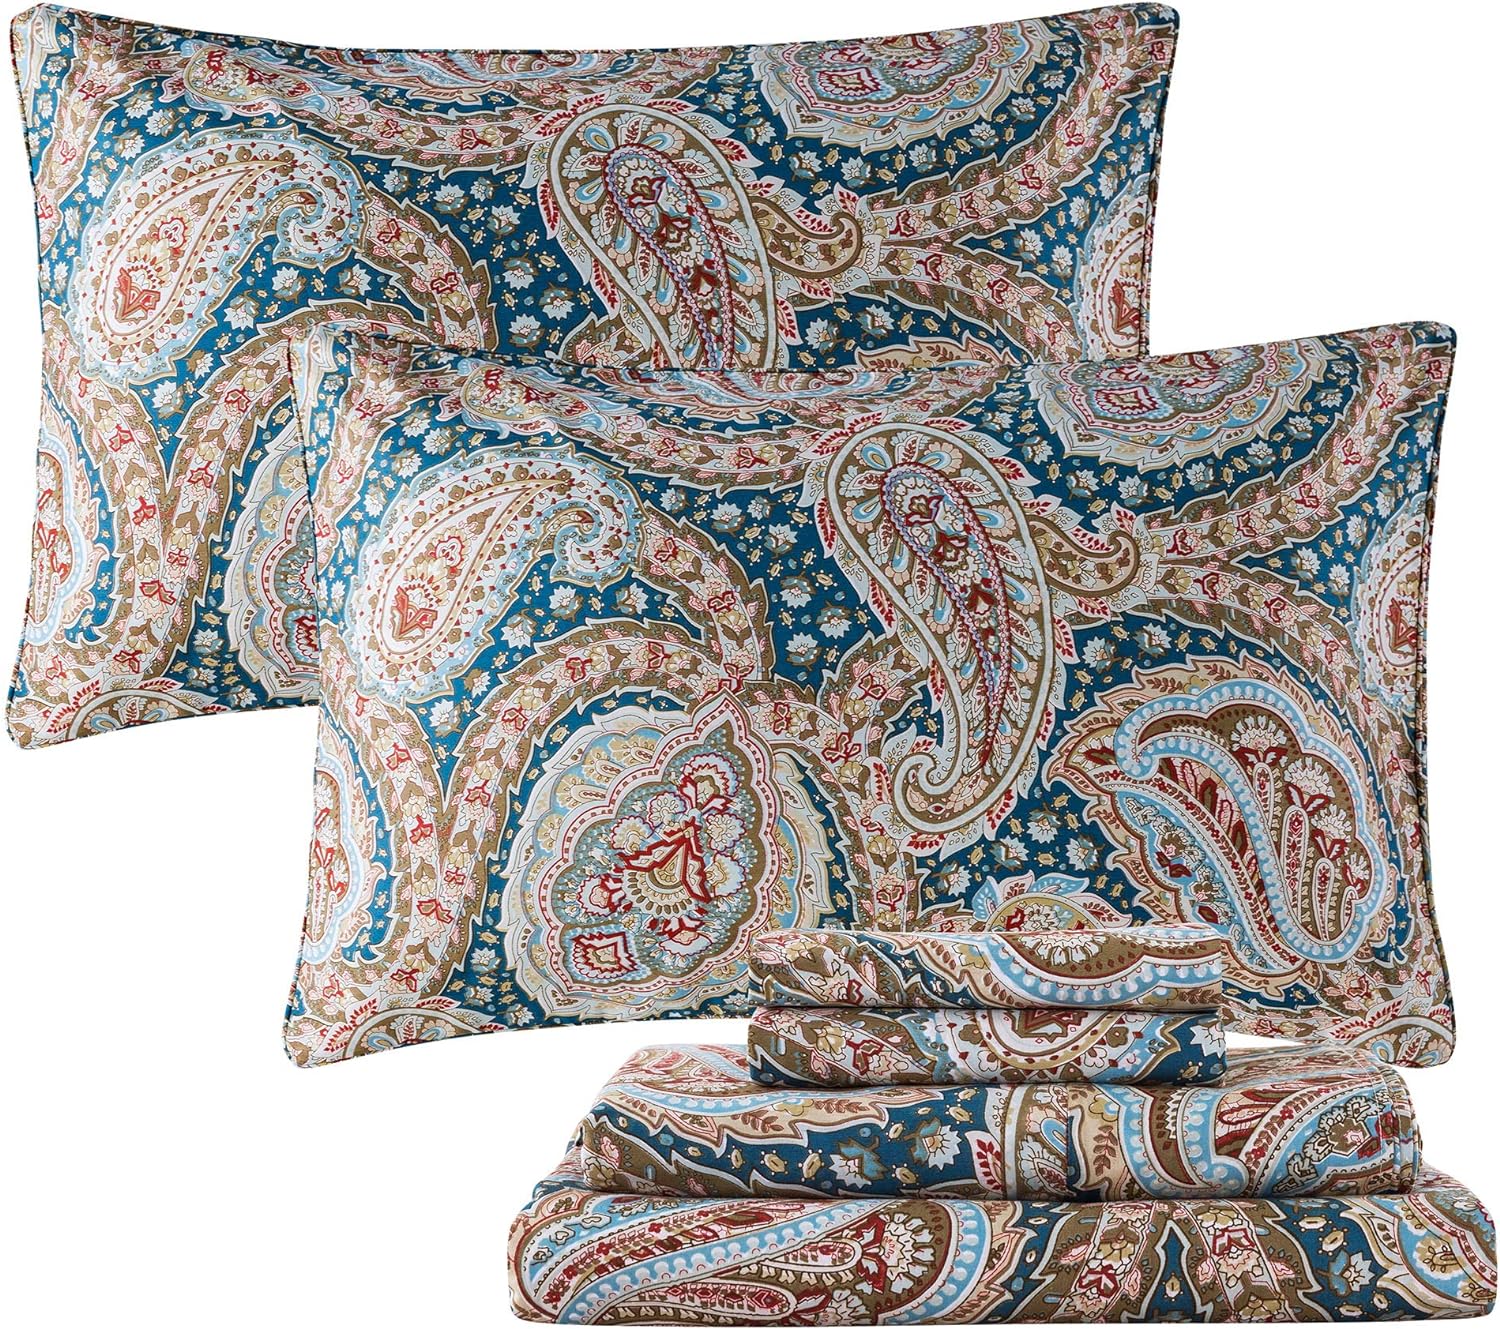 FADFAY Luxury Paisley Sheets Set Queen Classy Blue and Gold Floral Farmhouse Bedding Elegent Blue Paisley Bedding Set 100% Cotton Super Soft Hypoallergenic Deep Pocket Fitted Sheet 4Pcs, Queen Size